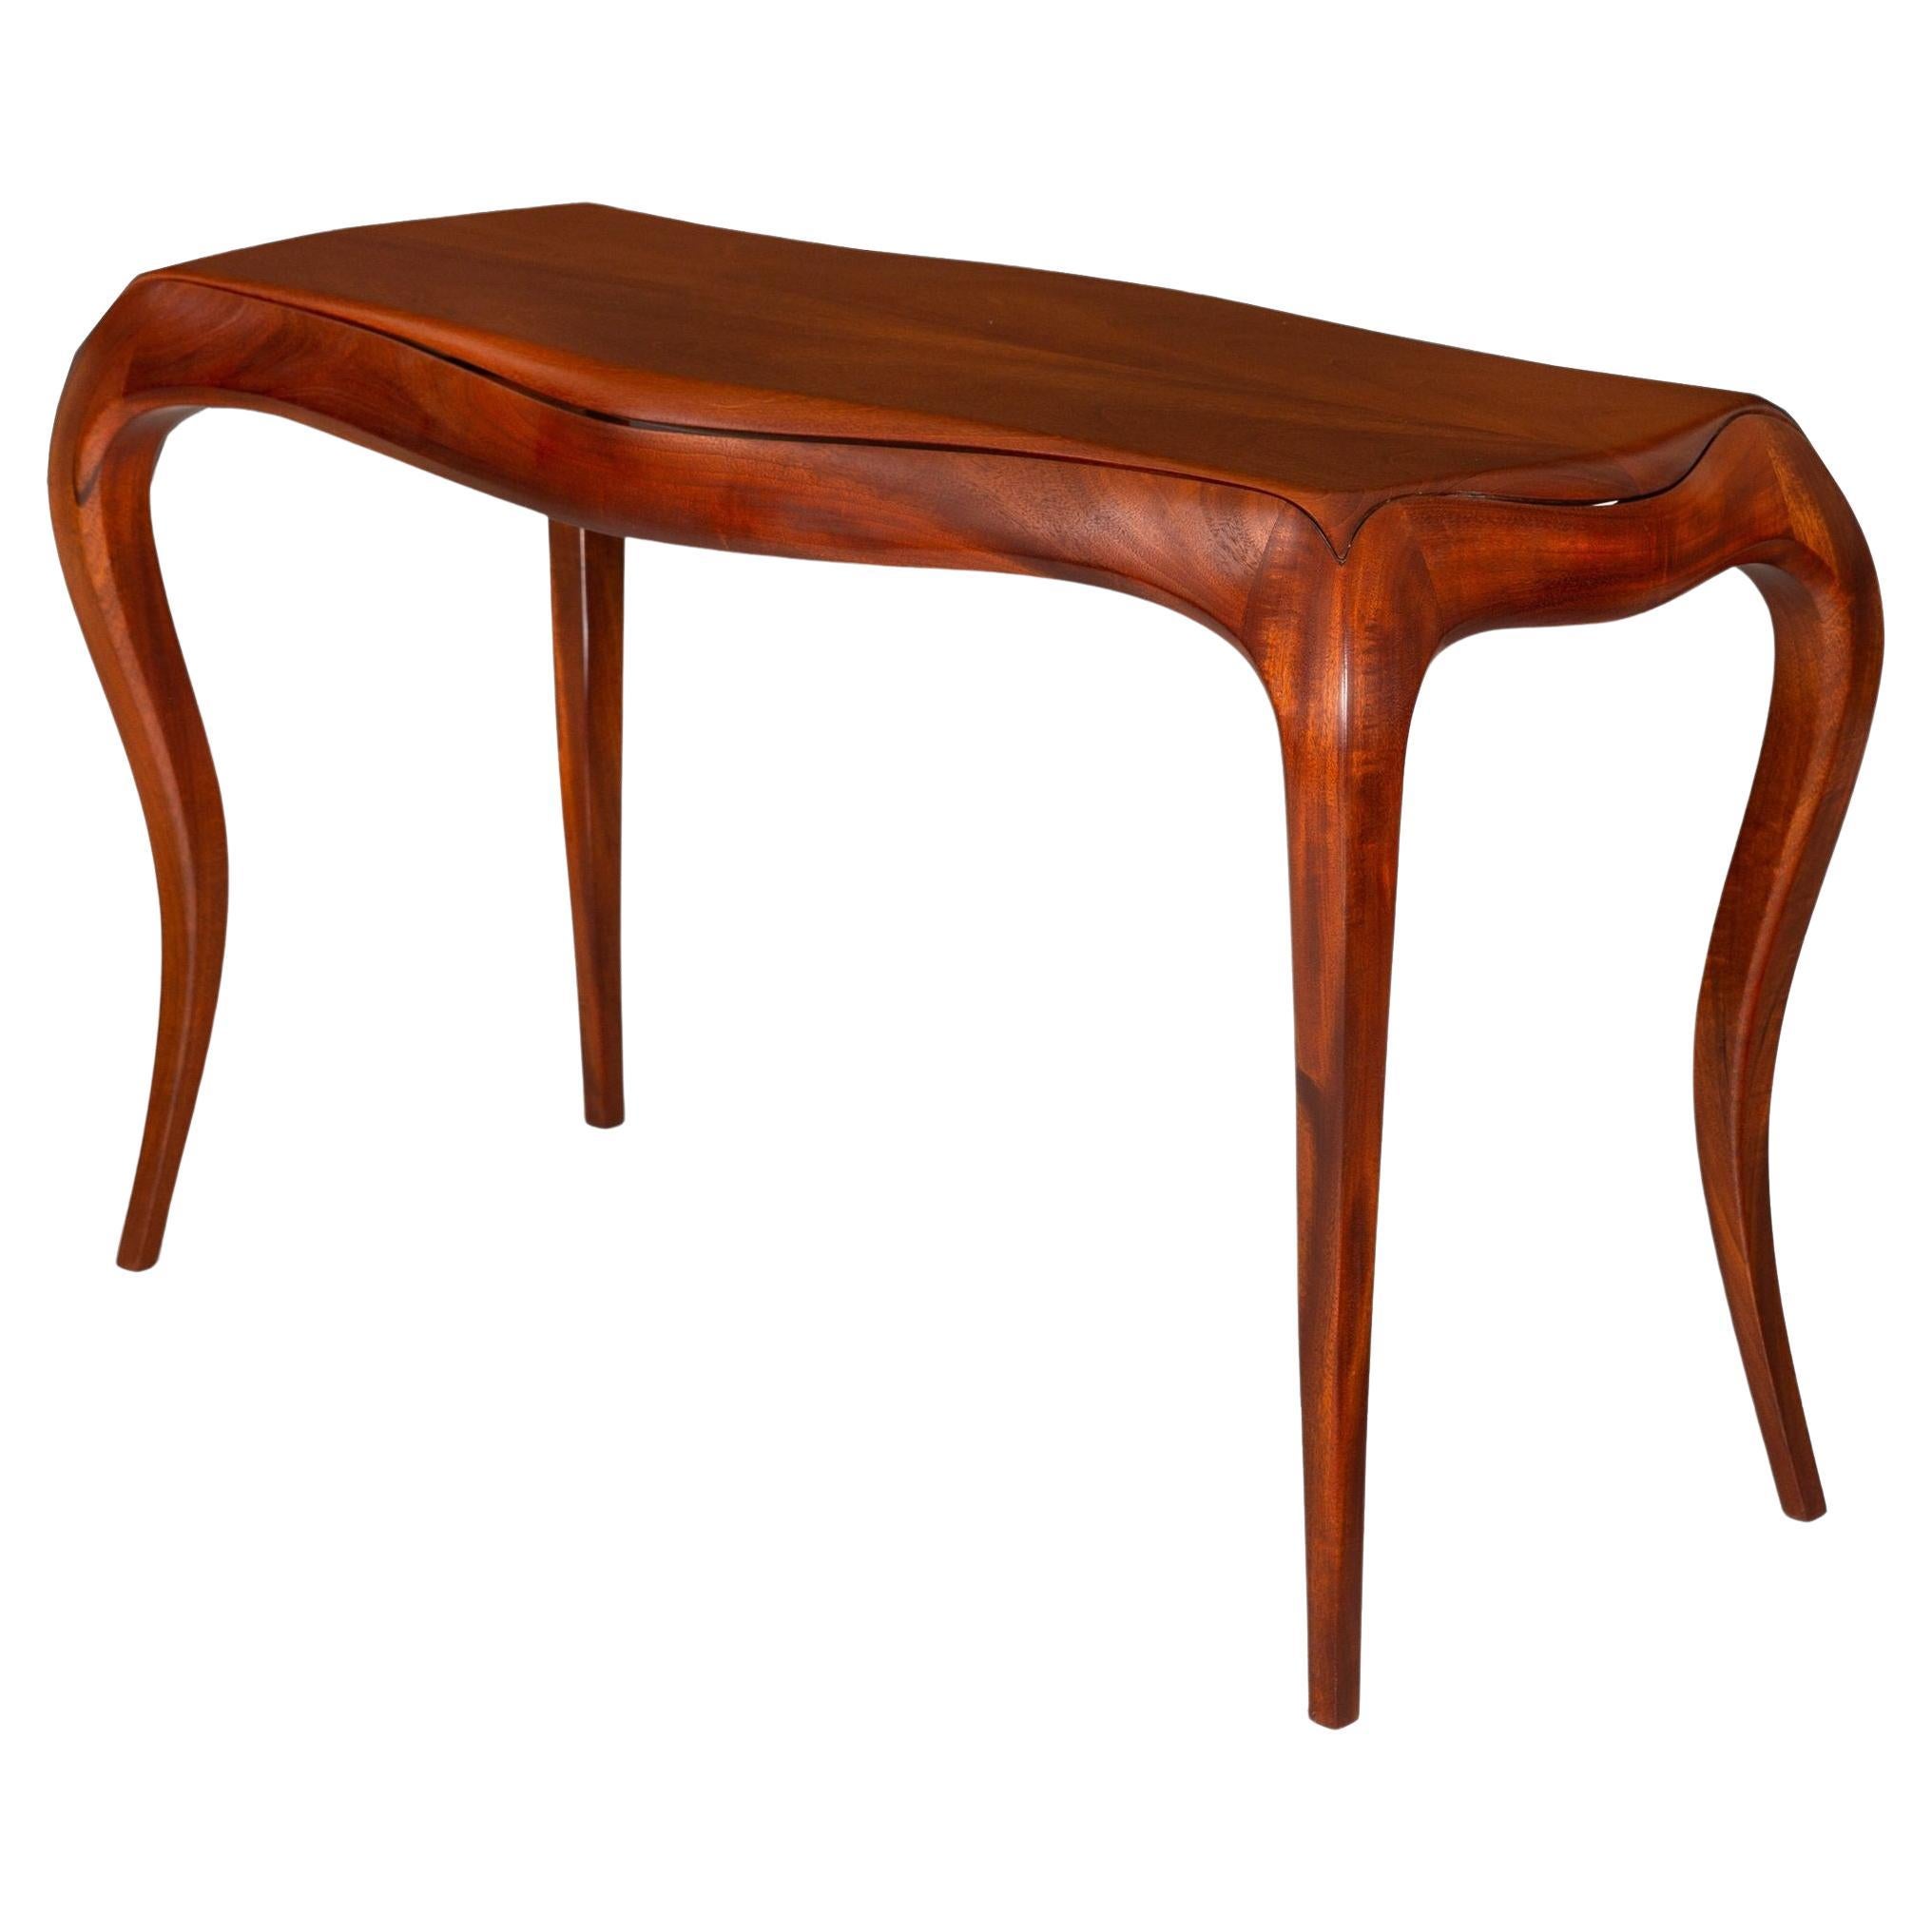 20th Century Modernist Serpentine Mahogany Console Table For Sale